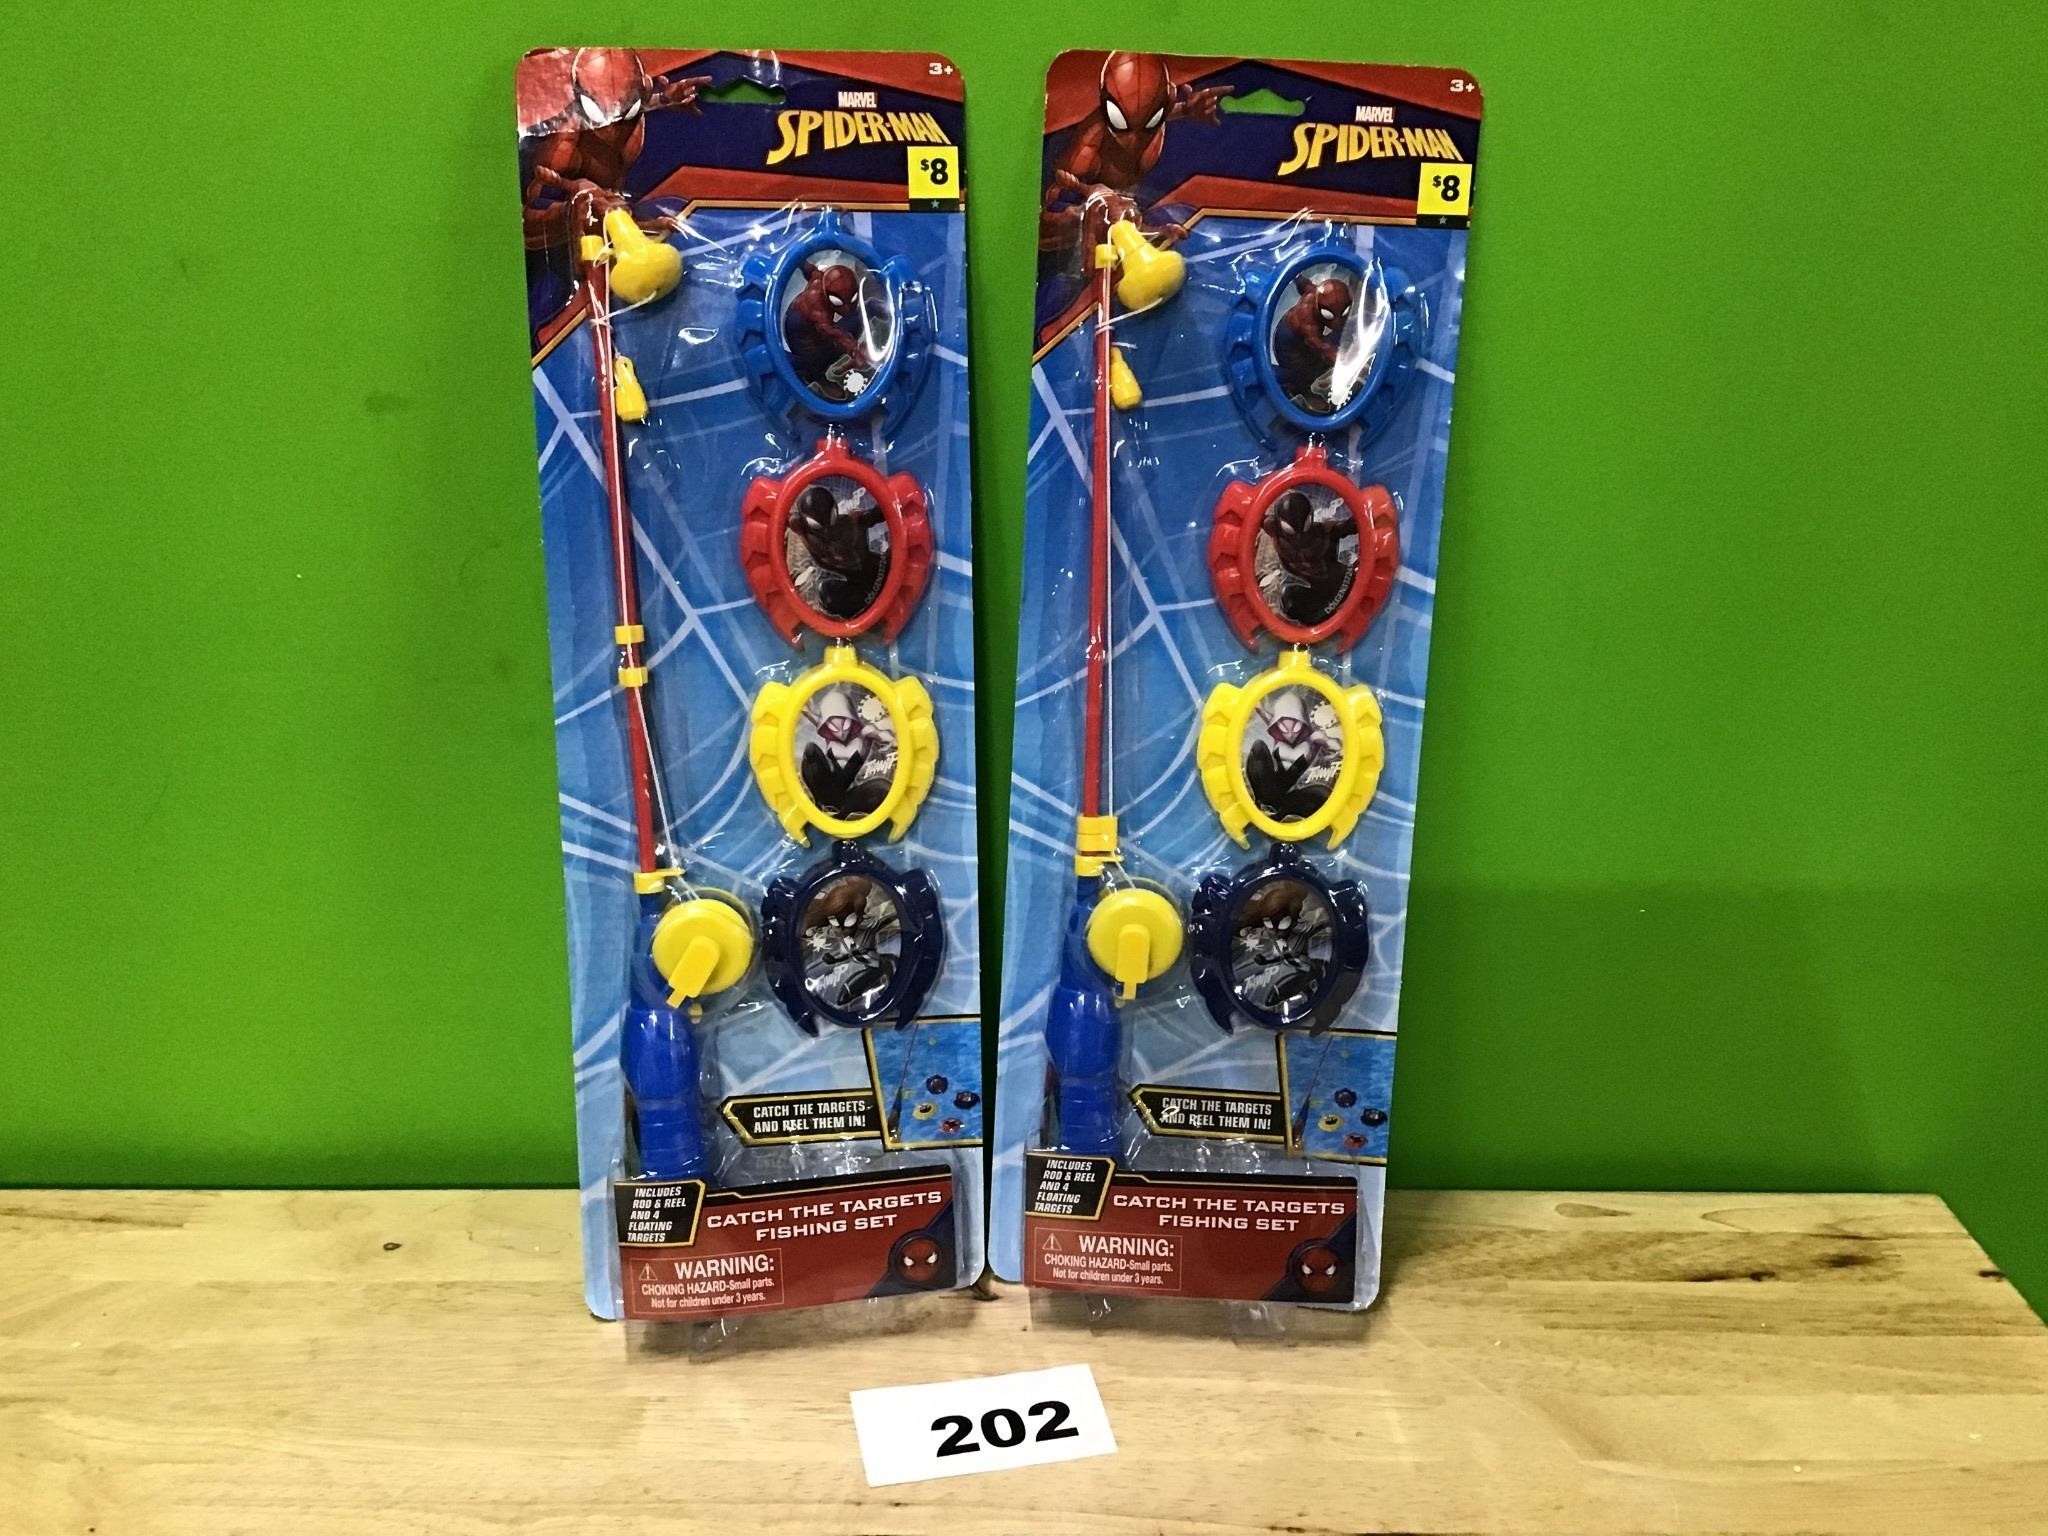 Spider-Man Catch the Targets Fishing Set lot of 2